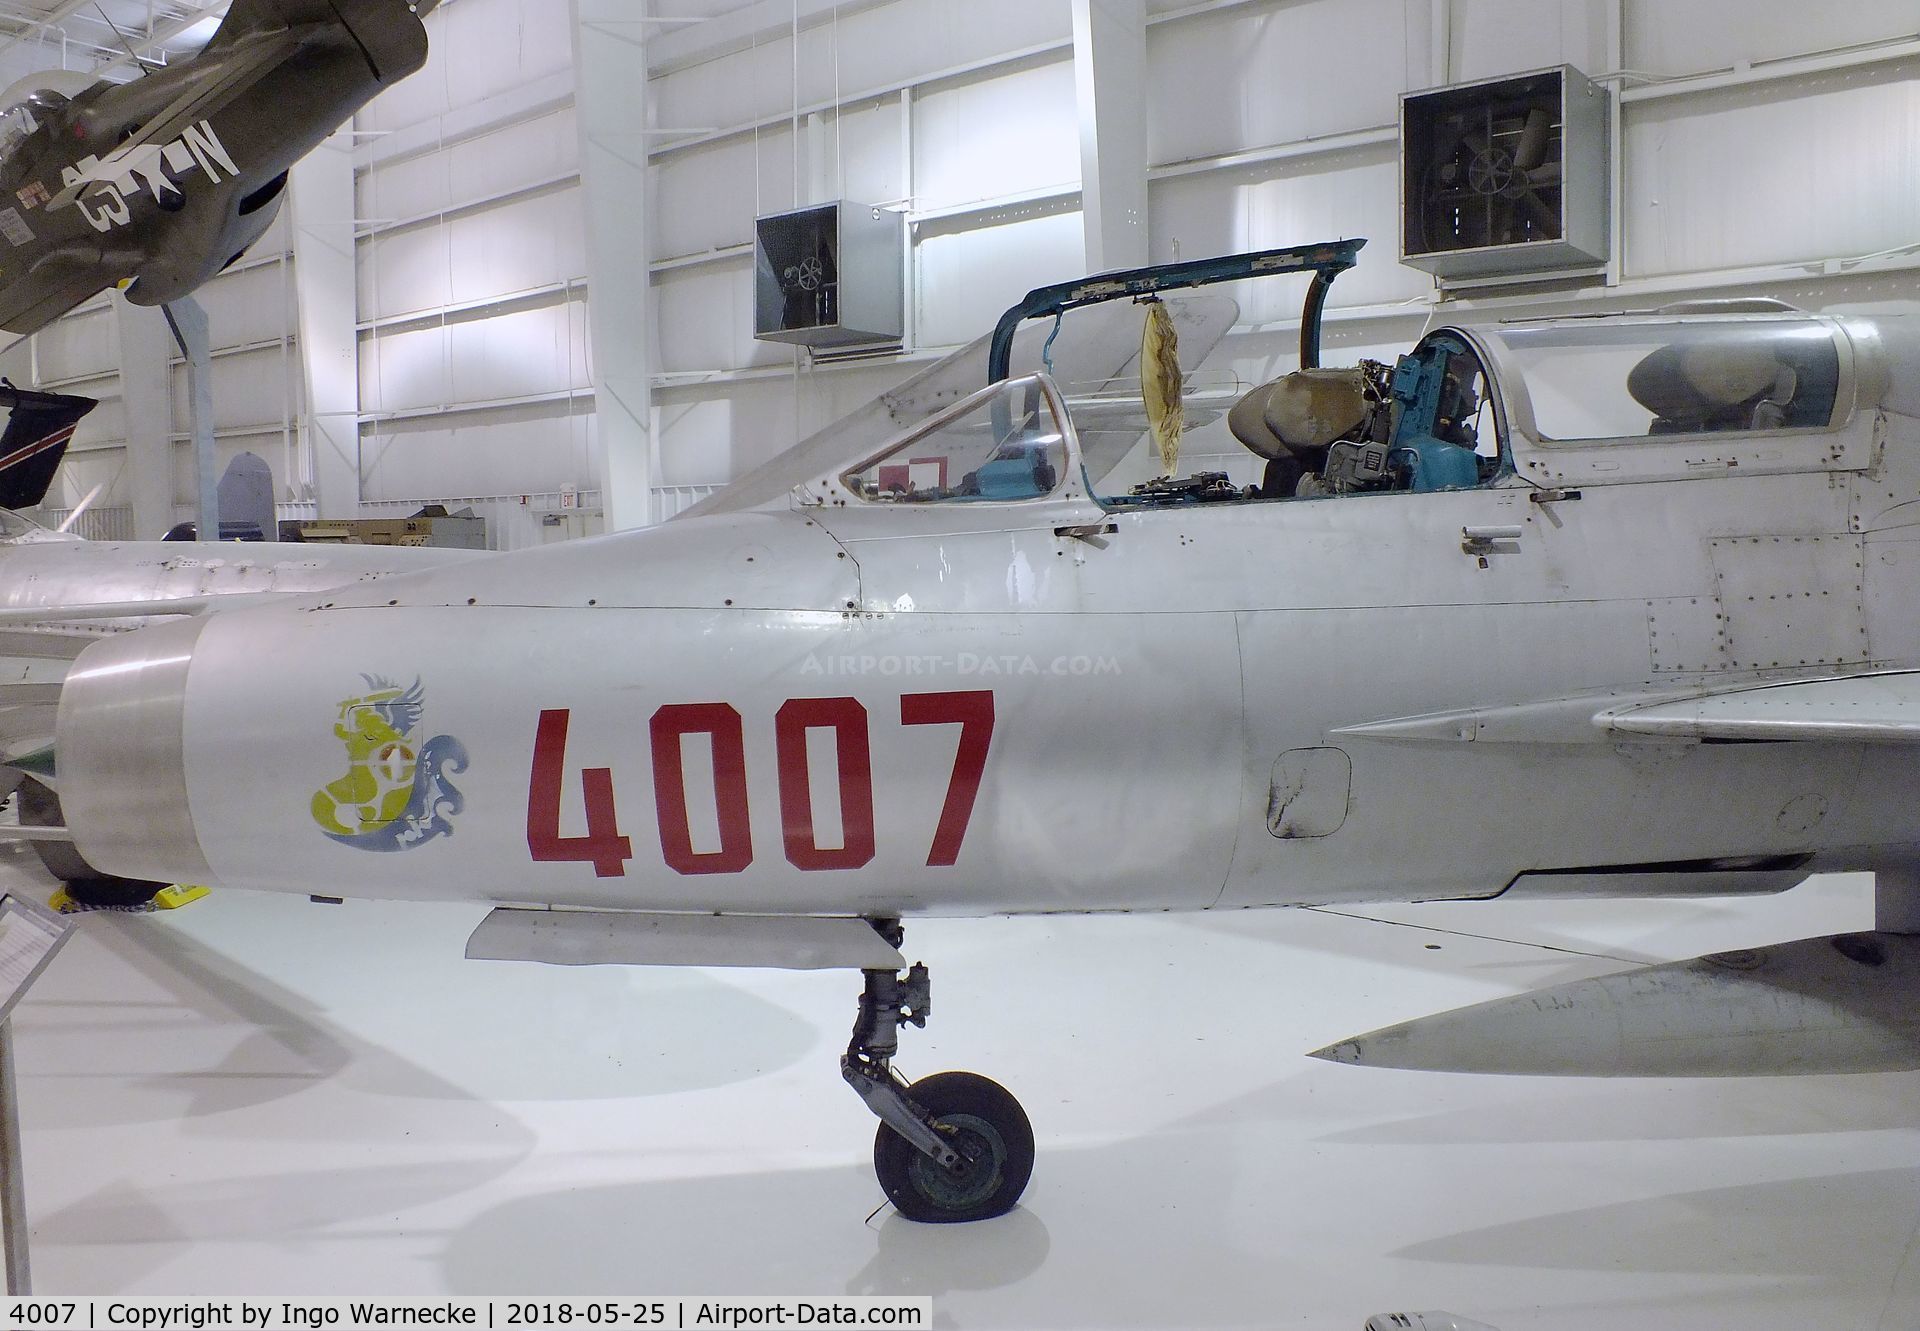 4007, Mikoyan-Gurevich MiG-21US C/N 07685140, Mikoyan i Gurevich MiG-21US MONGOL-B at the Tennessee Museum of Aviation, Sevierville TN